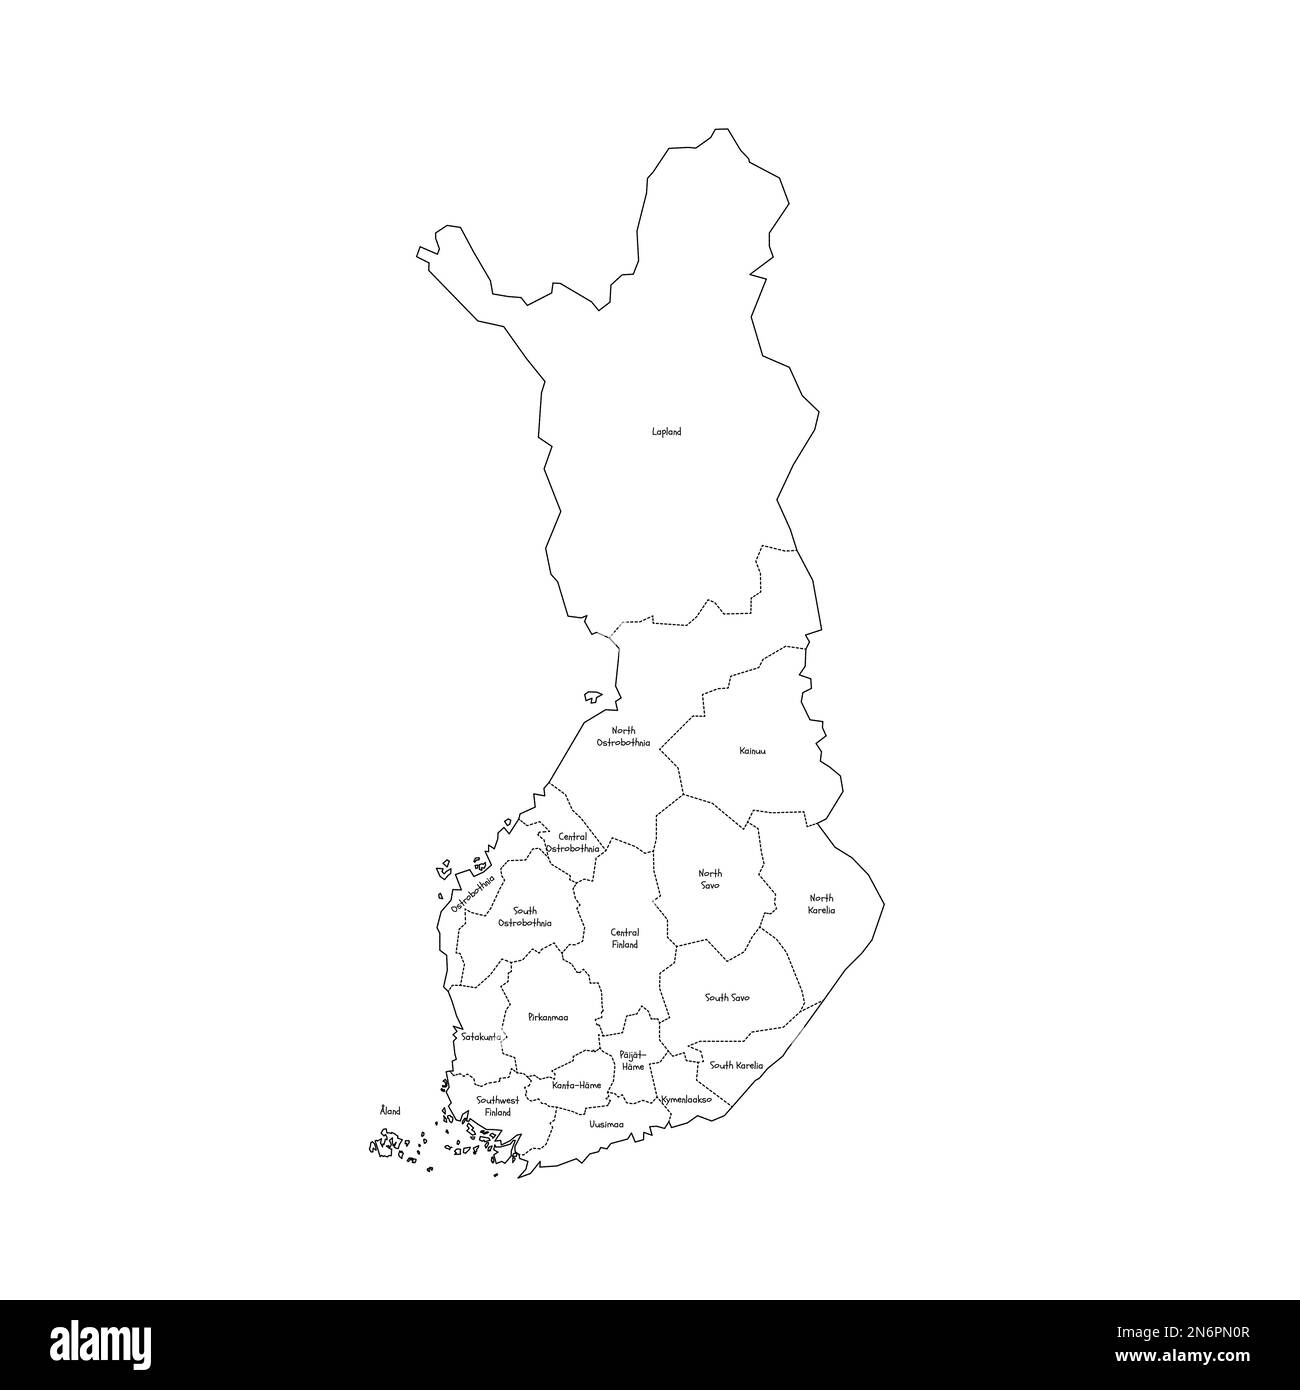 Finland political map of administrative divisions - regions and one autonomous region of Aland. Handdrawn doodle style map with black outline borders and name labels. Stock Vector